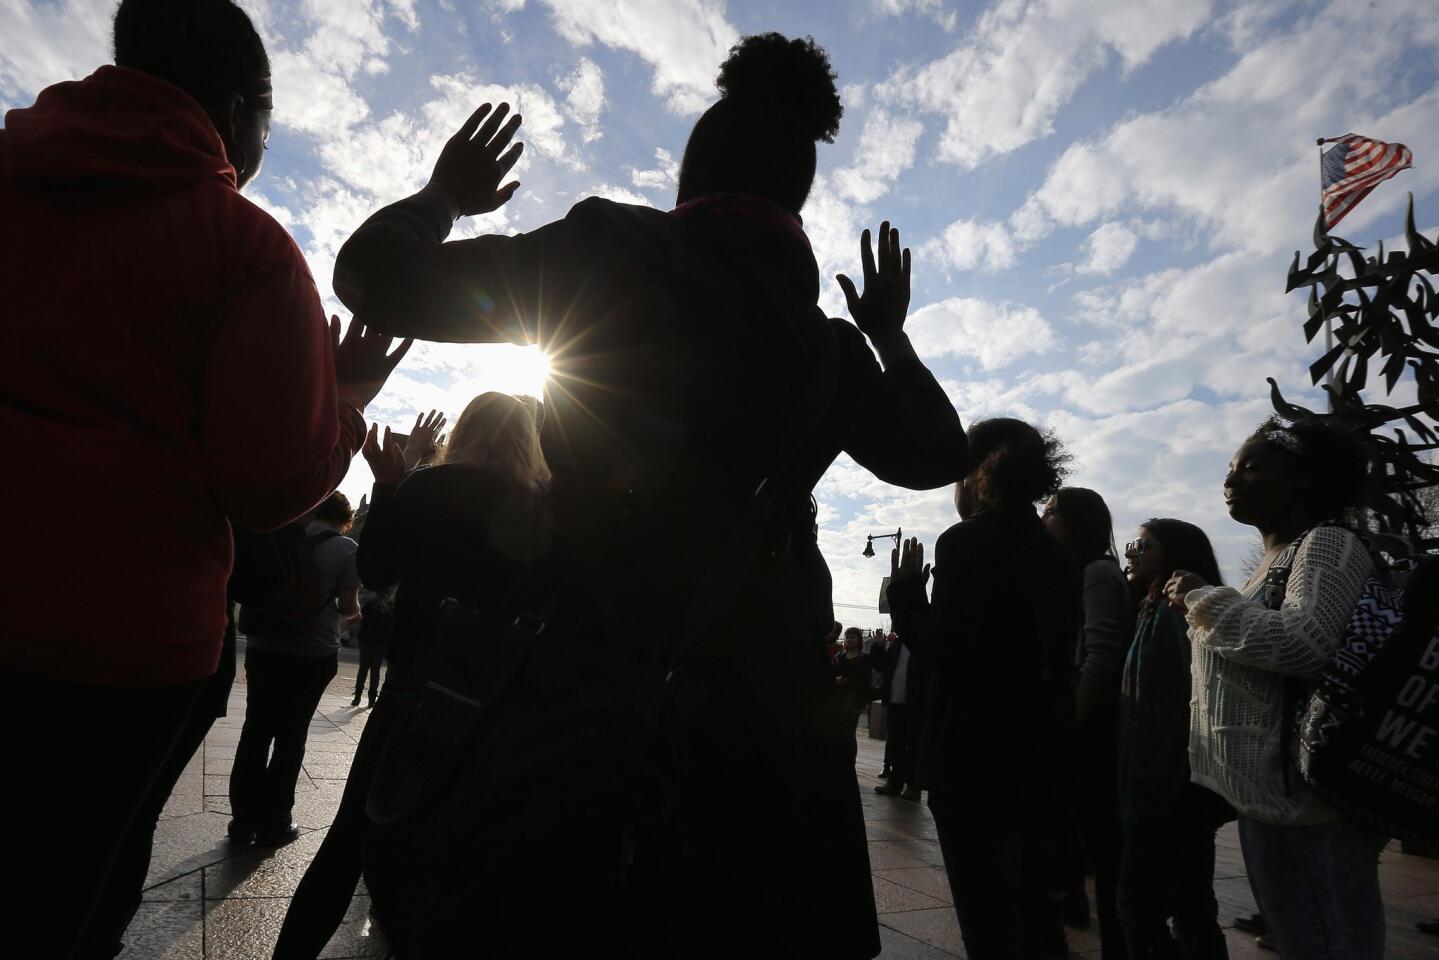 Demonstrators participate in a nationwide "Hands Up, Walk Out" protest Dec. 1 at Boston University. The protesters say charges should have been filed in the fatal police shooting of Michael Brown in Ferguson, Mo.